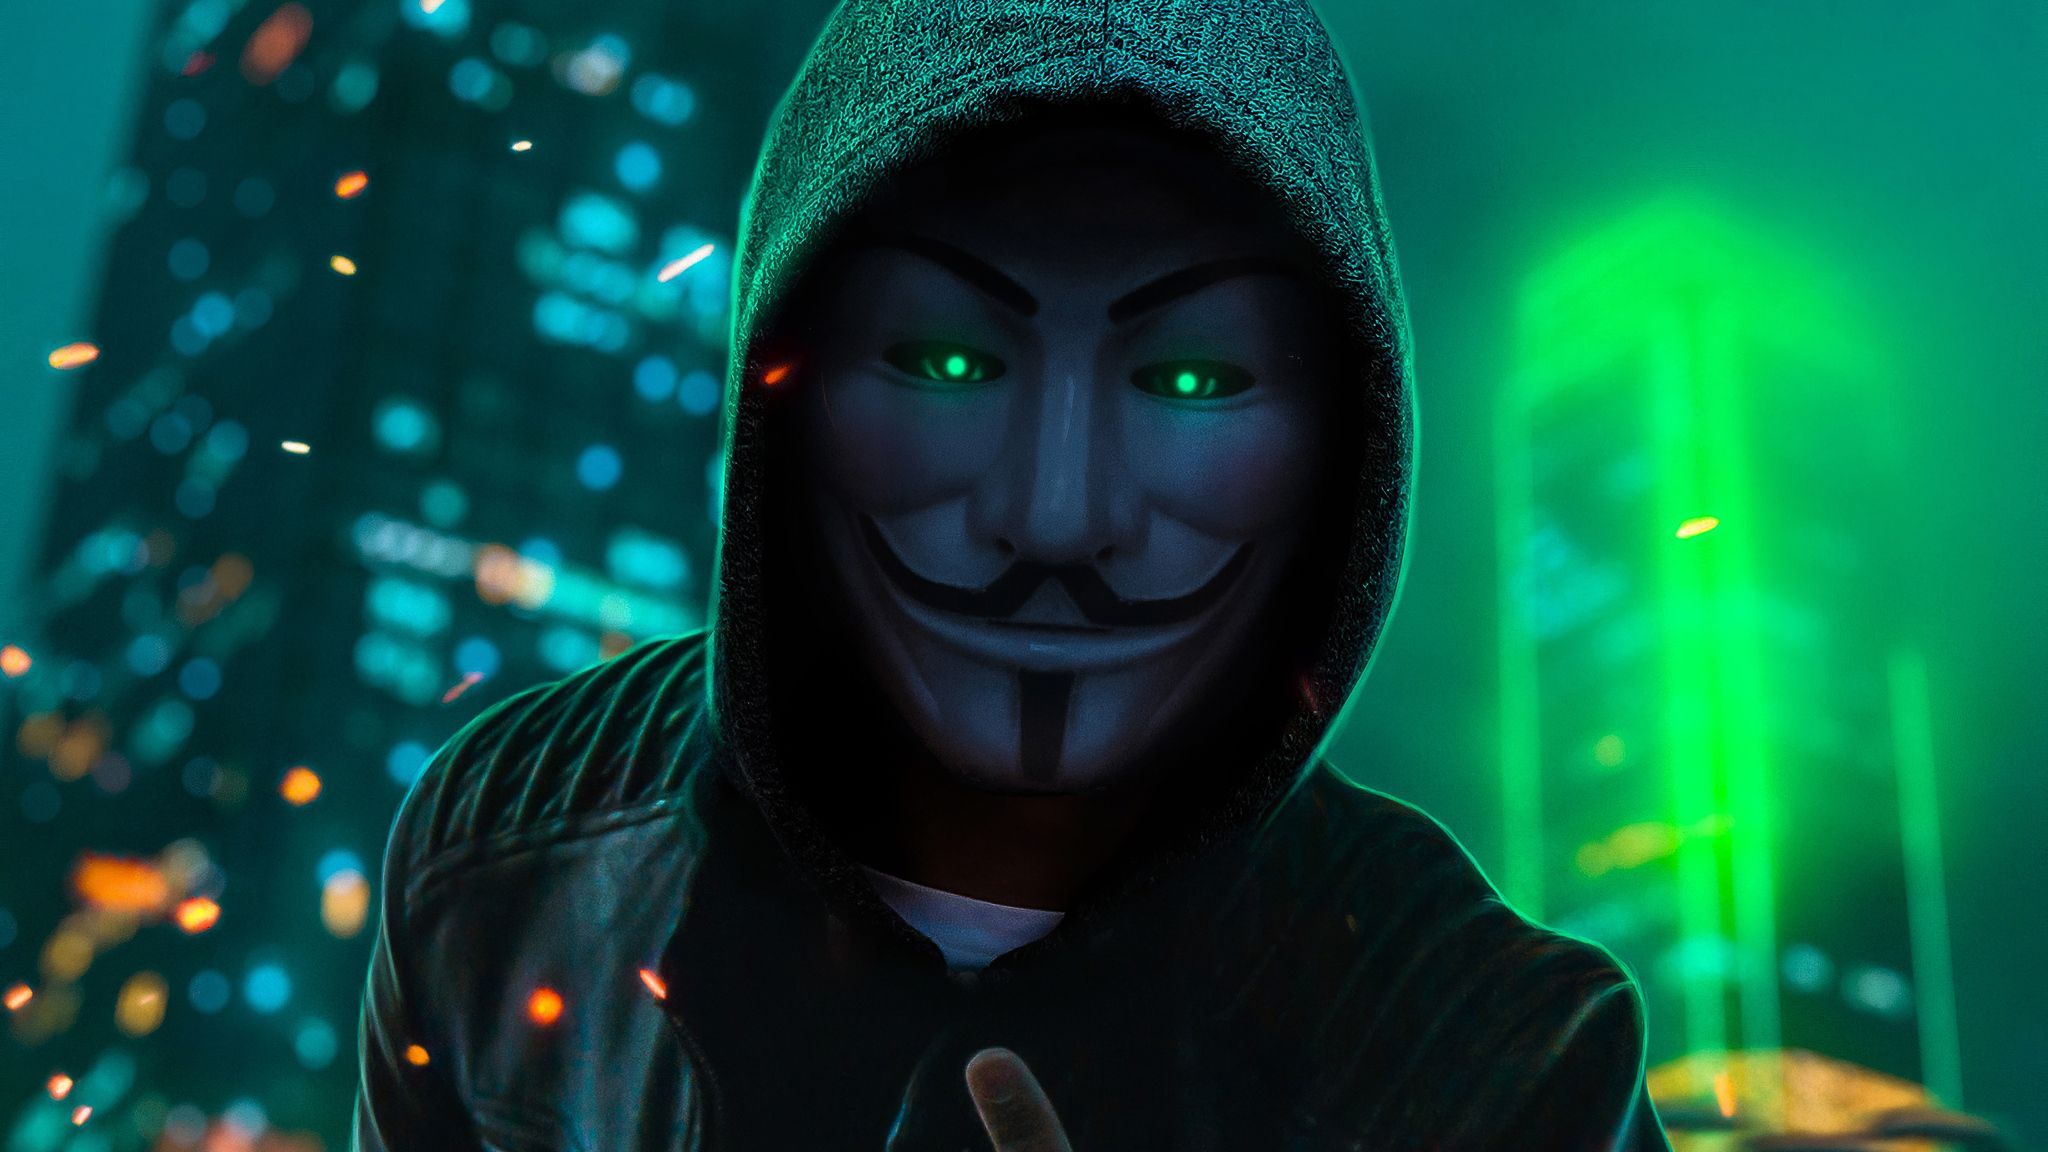 Anonymus Guy Glowing Eyes Green Neon 4k 2048x1152 Resolution HD 4k Wallpaper, Image, Background, Photo and Picture